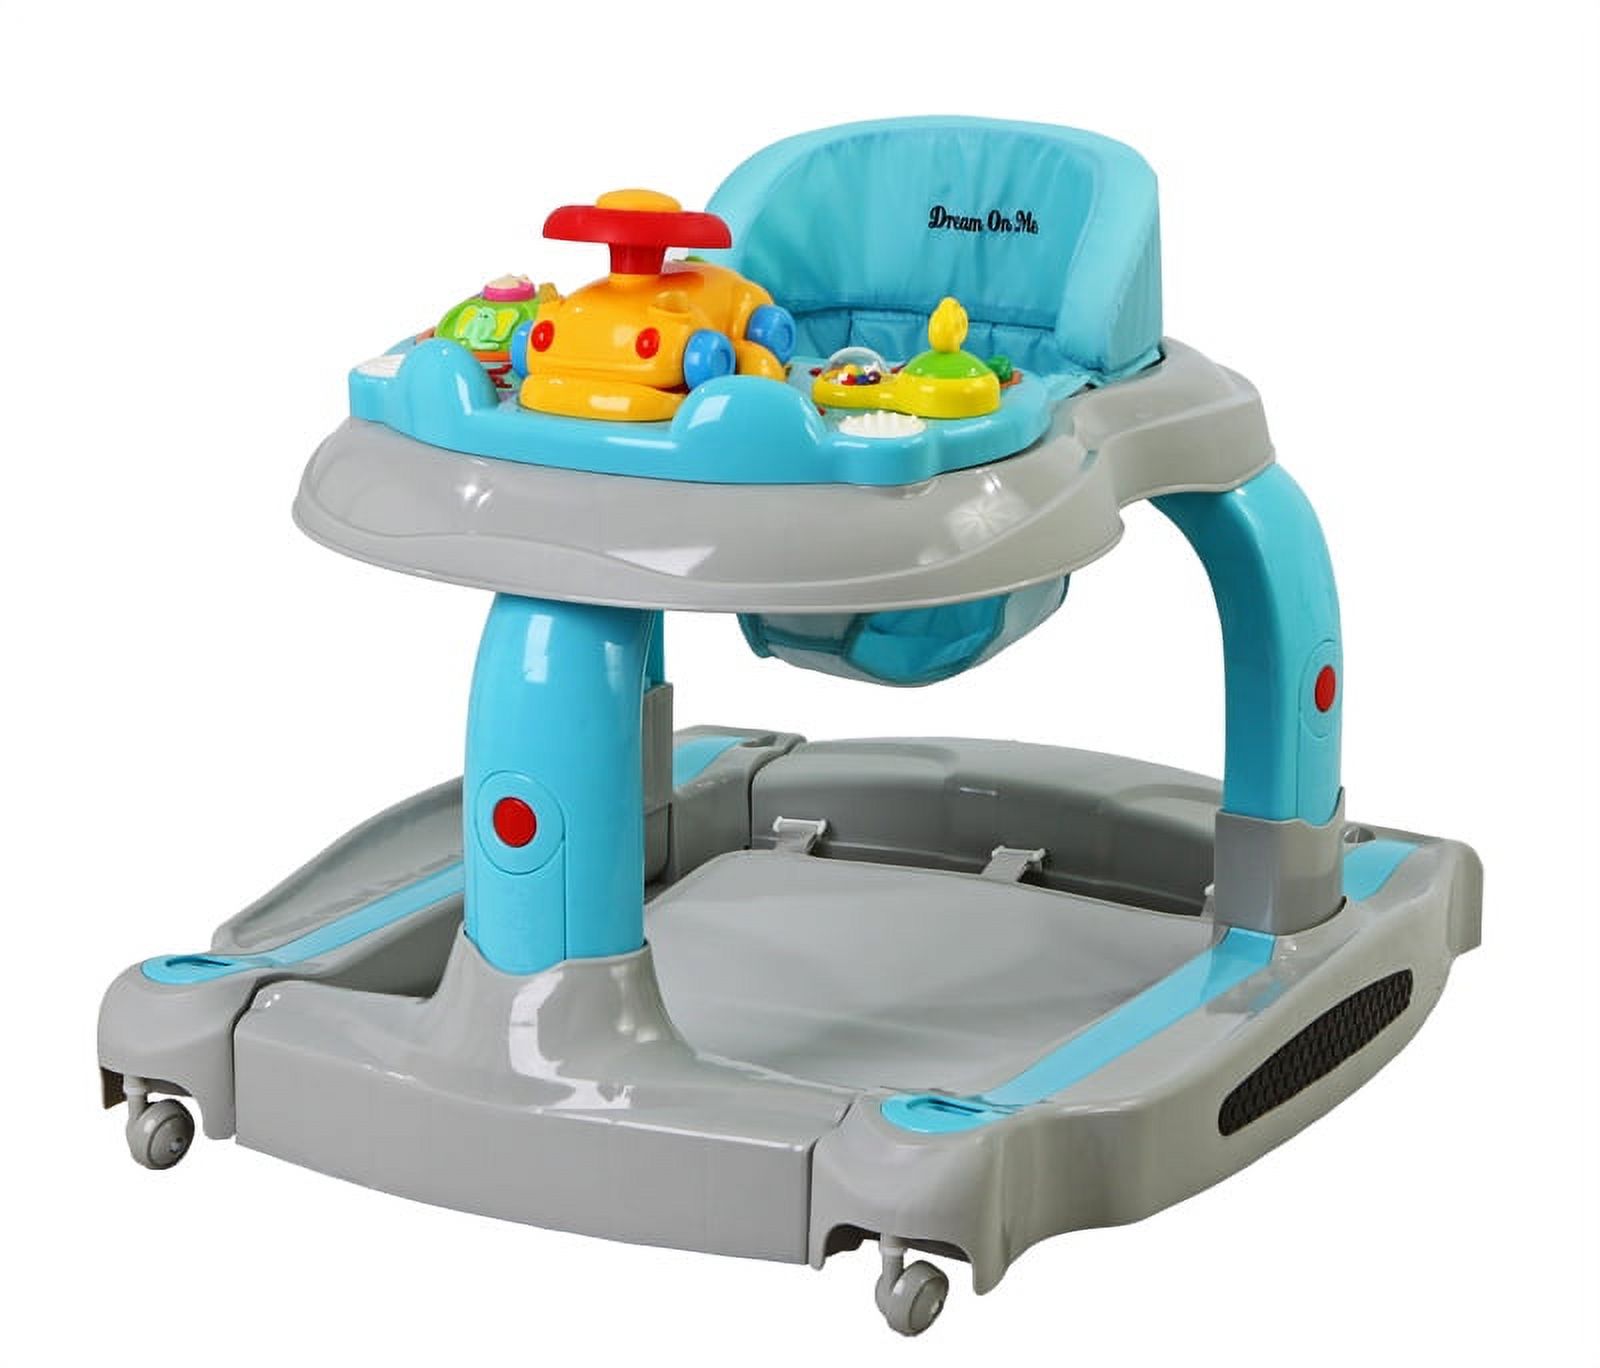 Dream On Me - 2-in-1 Baby Tunes Musical Activity Walker and Rocker, Gray - image 1 of 4